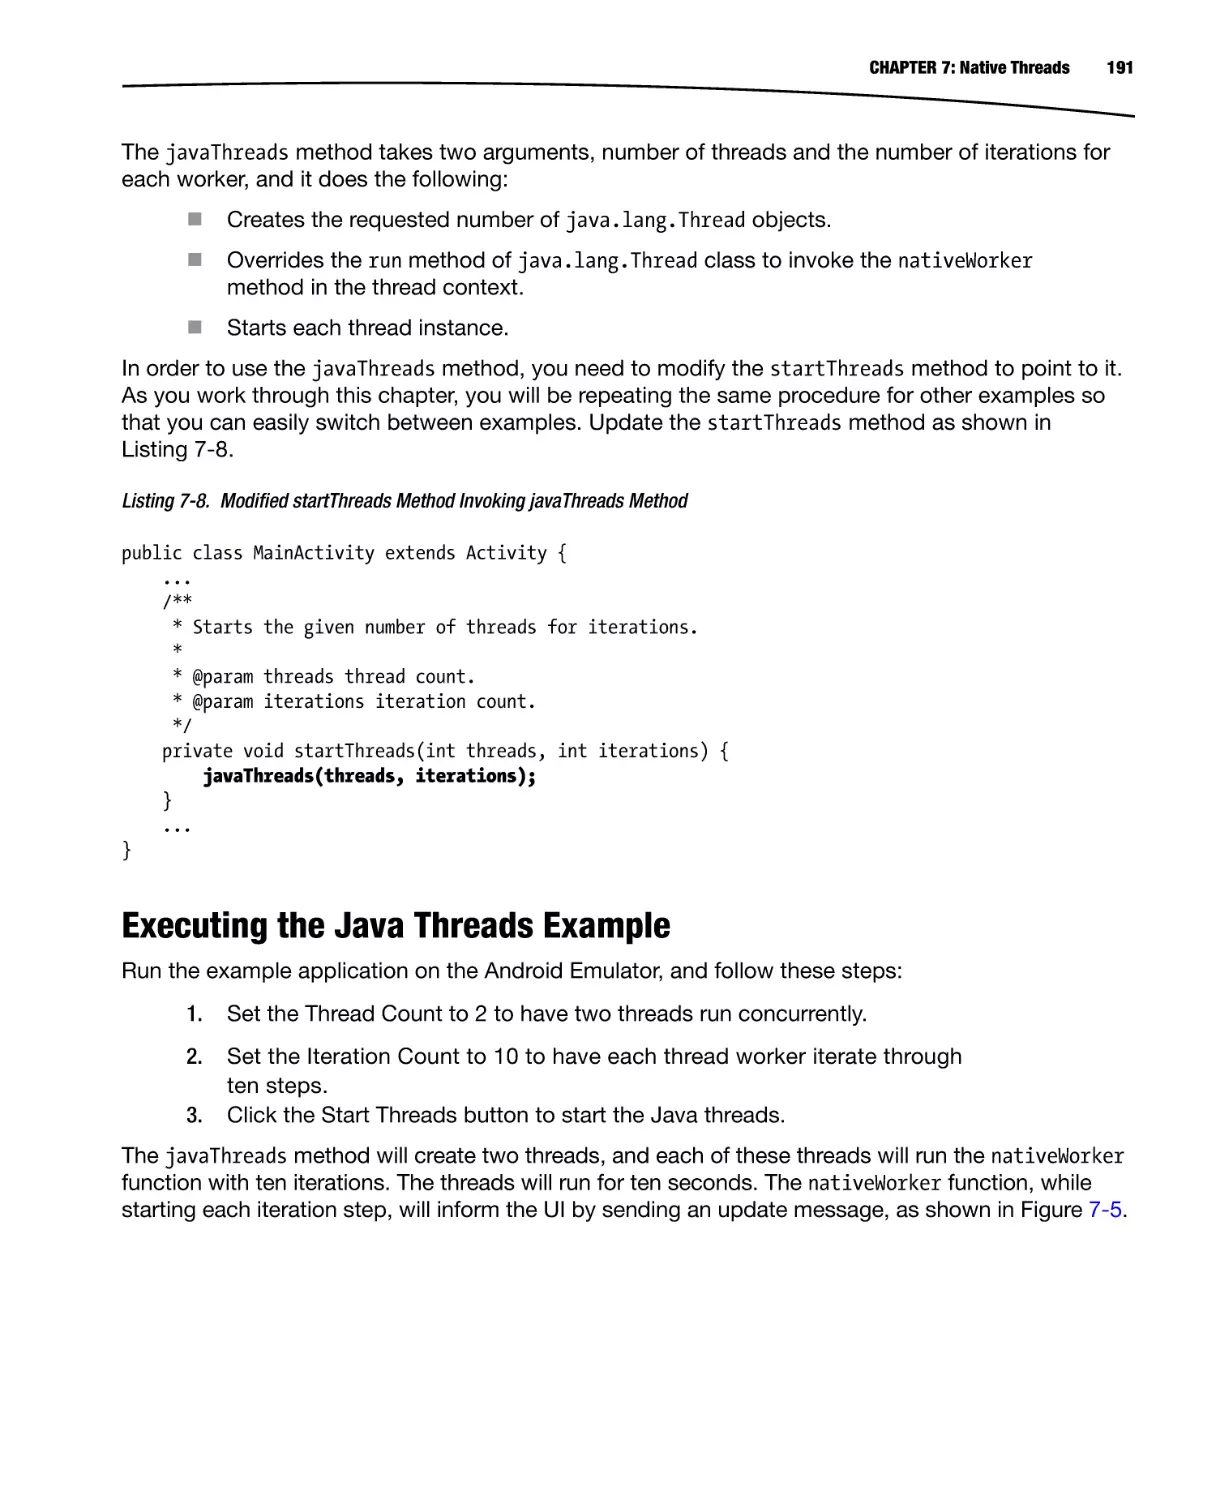 Executing the Java Threads Example